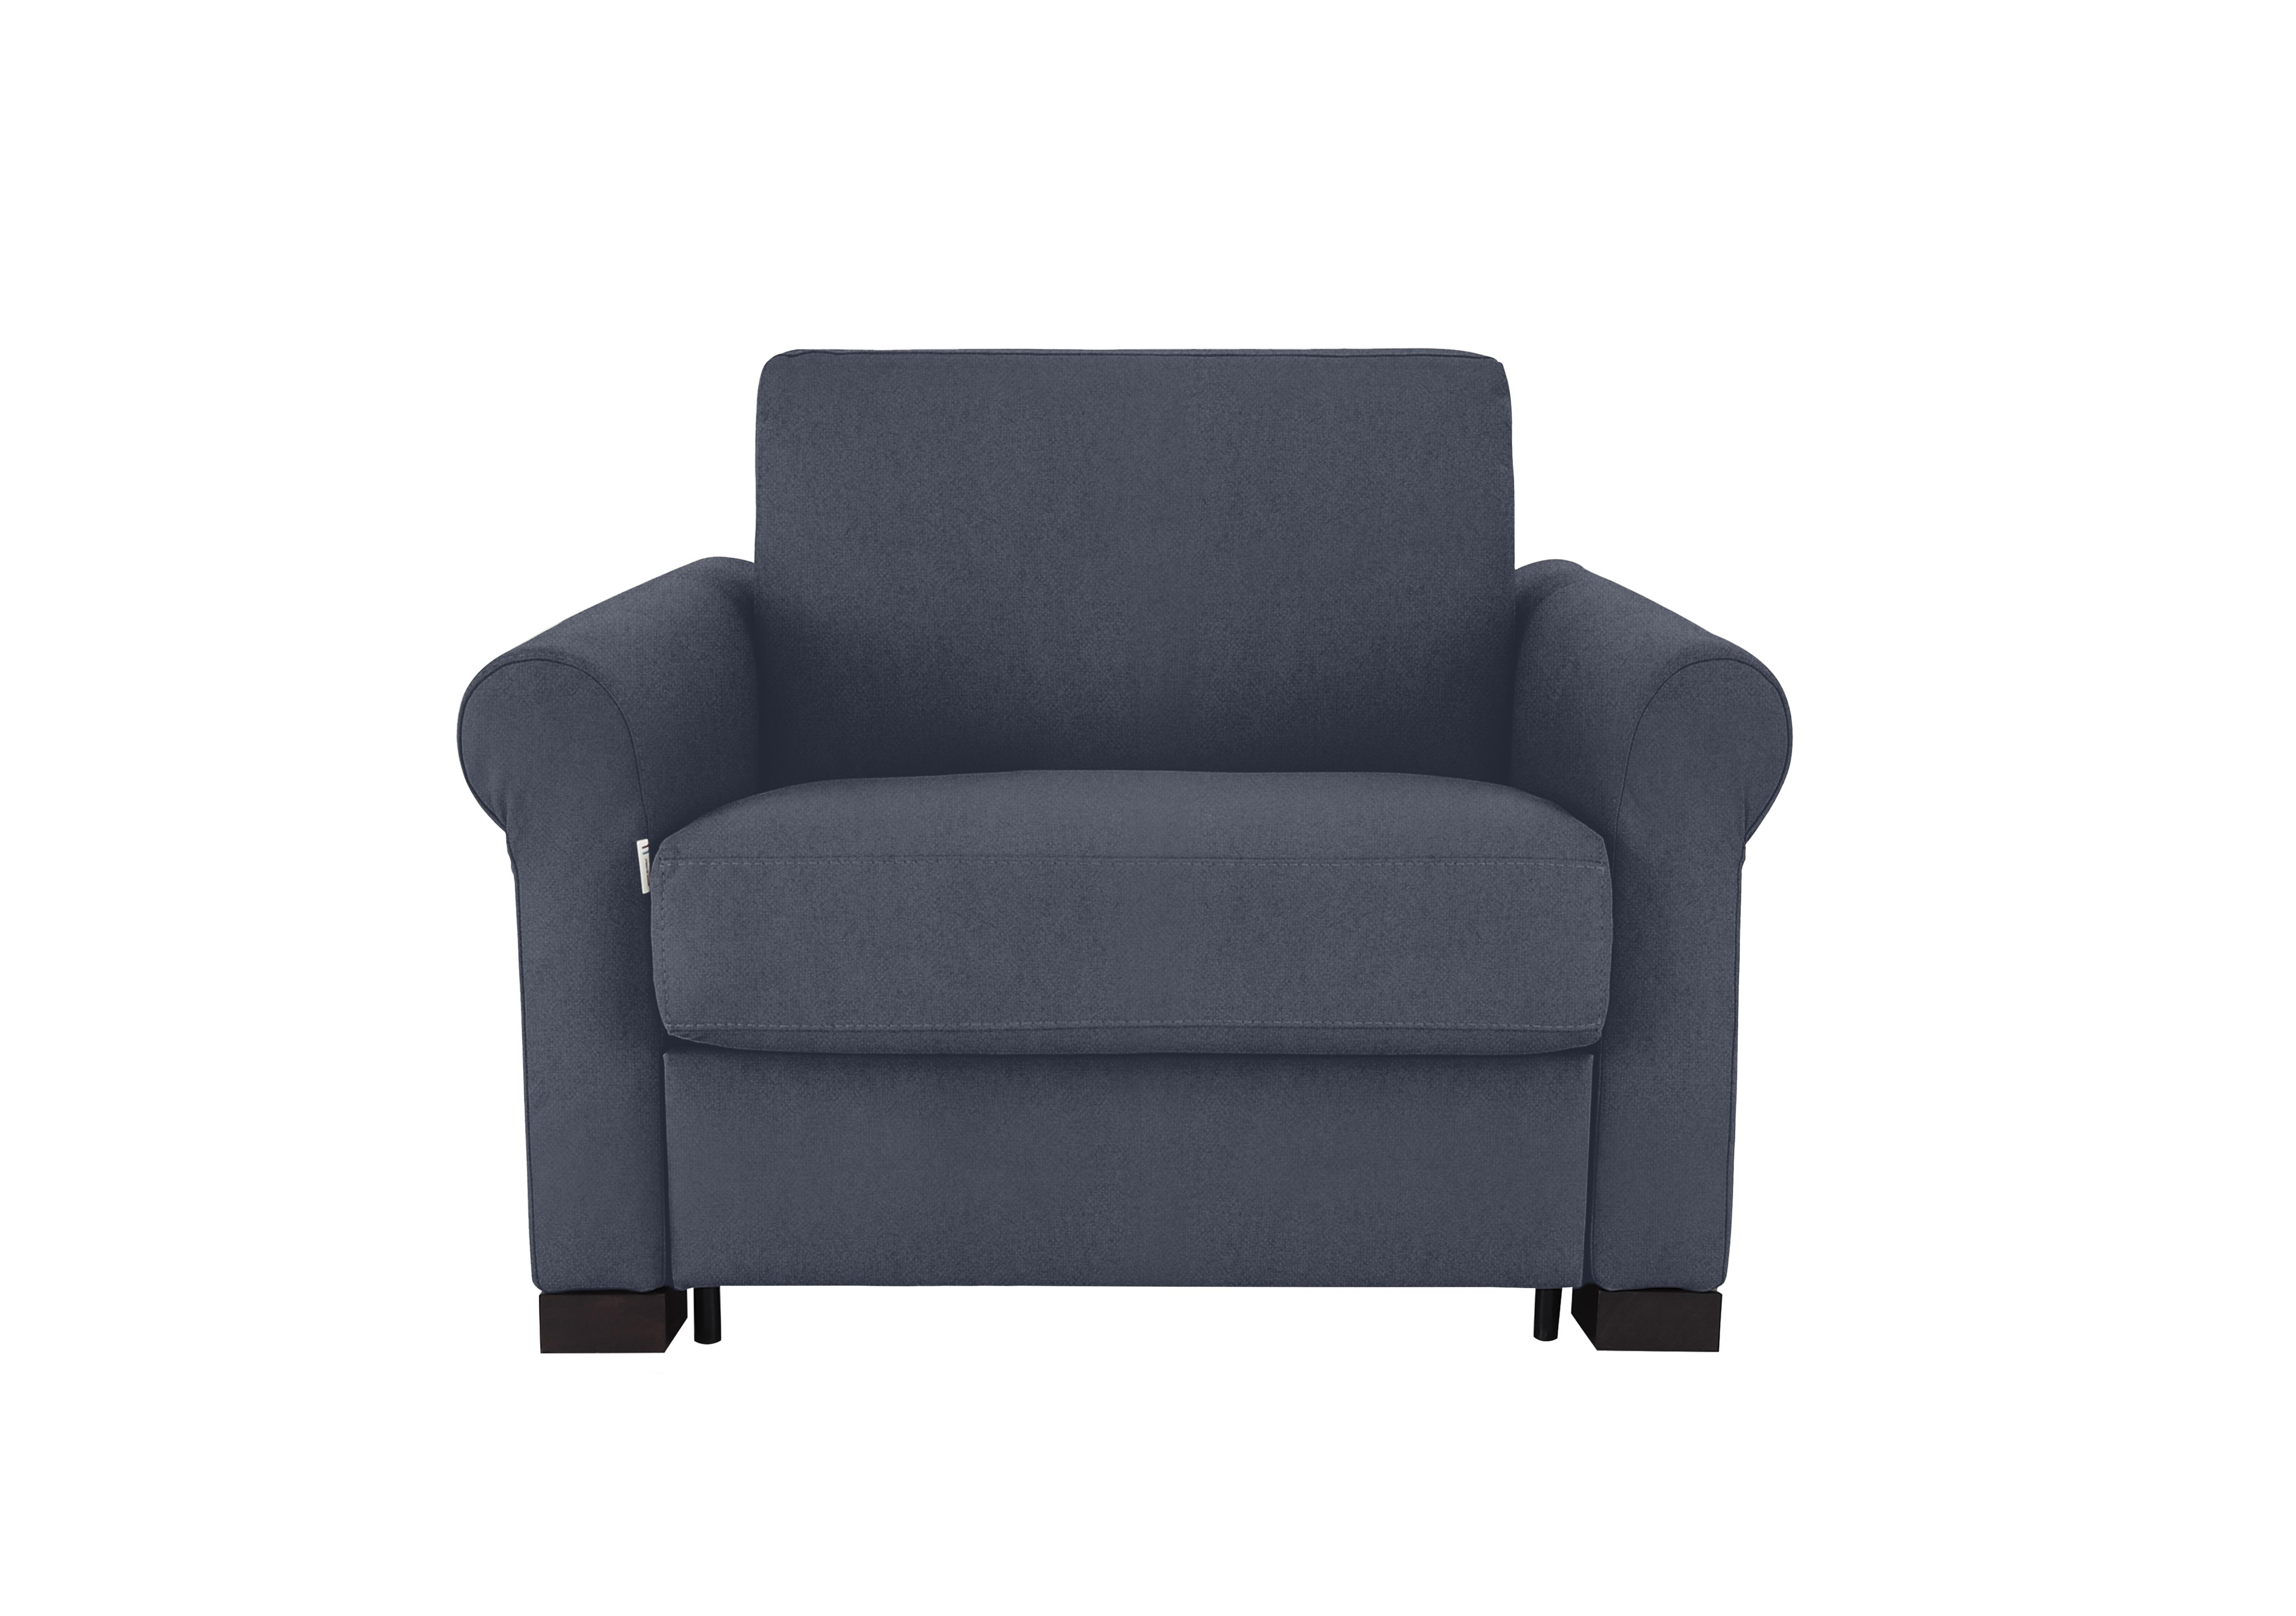 Alcova Fabric Chair Sofa Bed with Scroll Arms in Fuente Ocean on Furniture Village